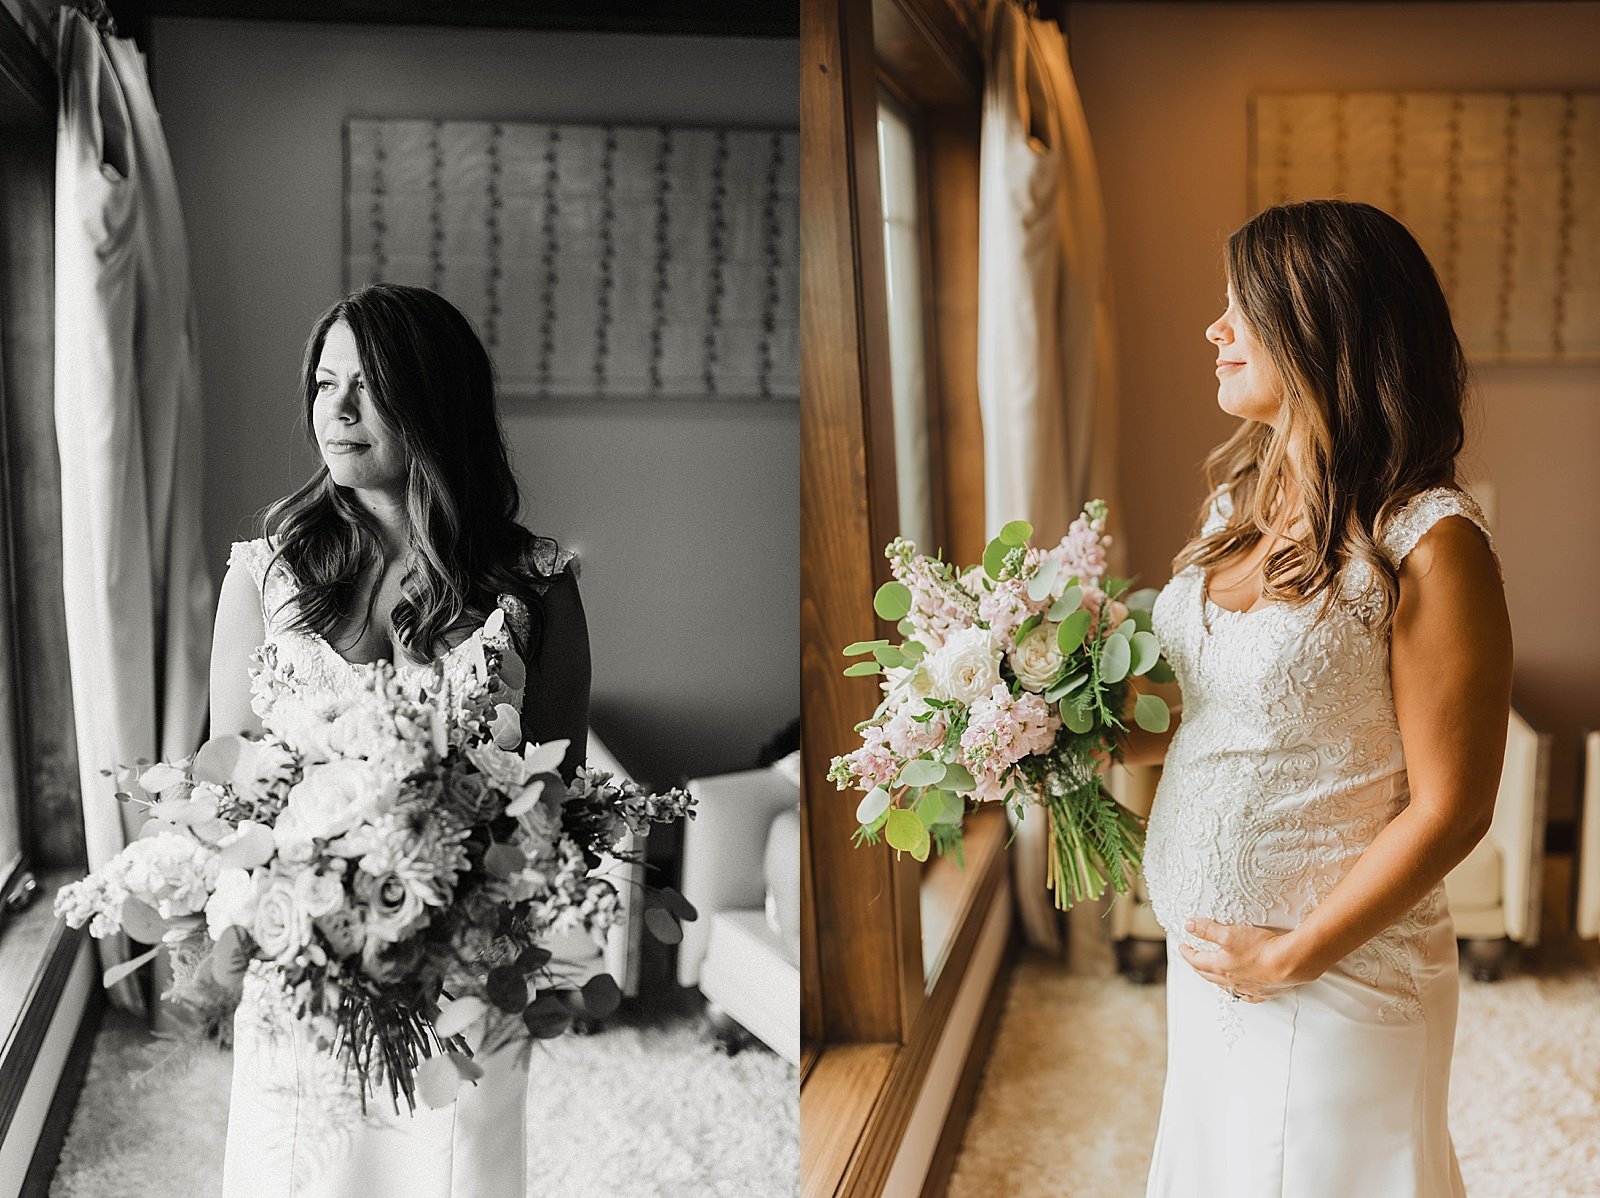  Bride with flowers standing by a window, by Alaska Wedding Photographer Theresa McDonald 